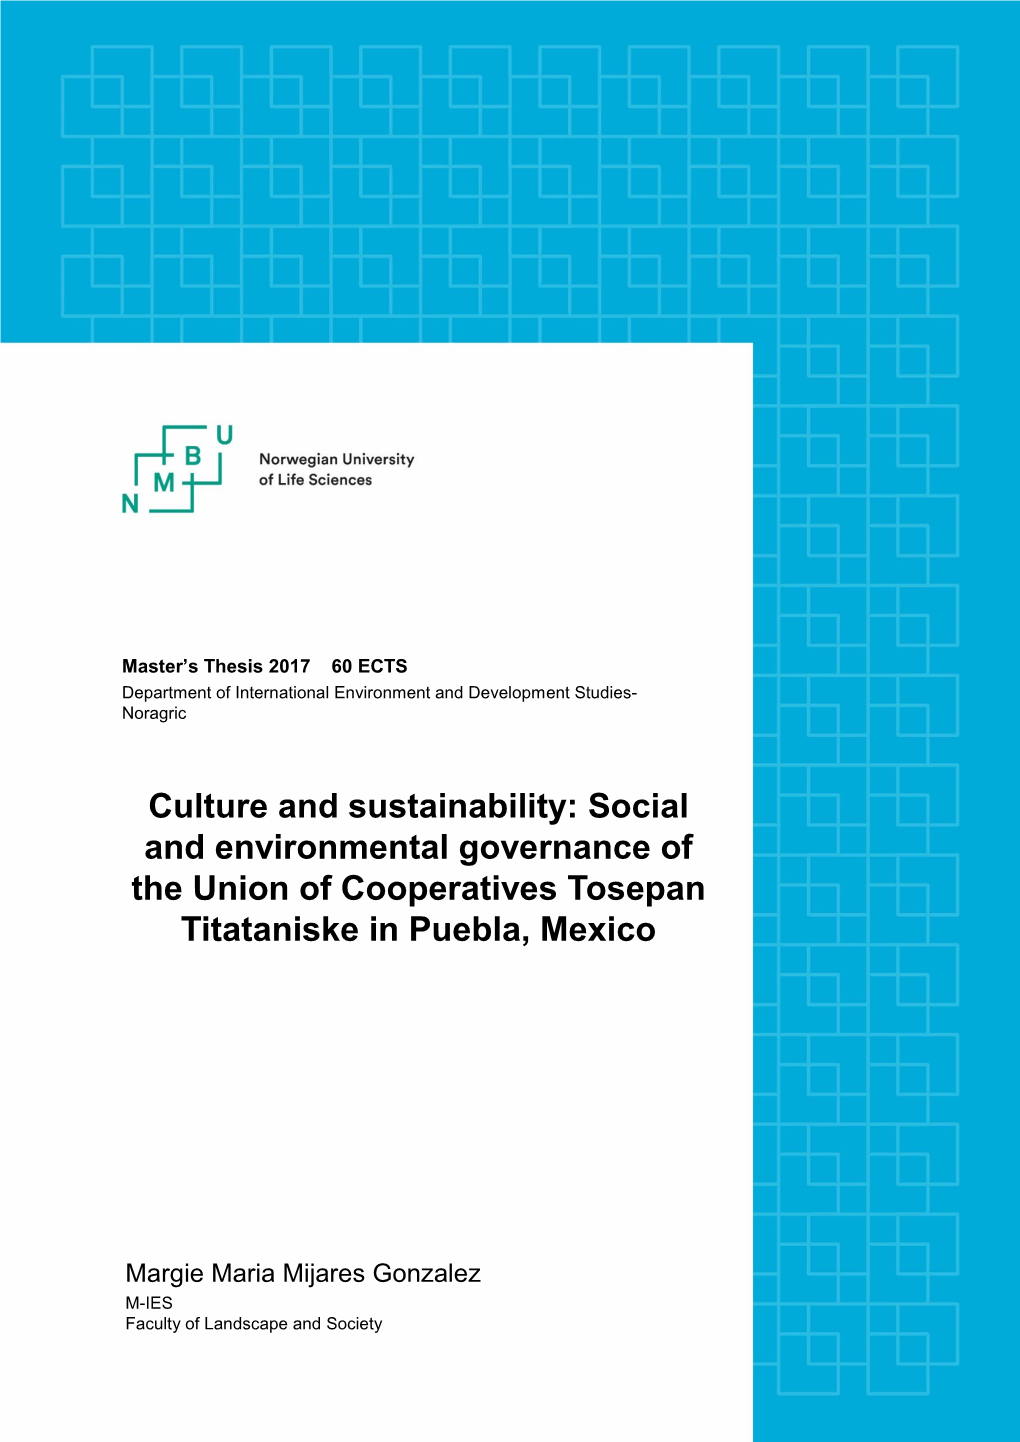 Social and Environmental Governance of the Union of Cooperatives Tosepan Titataniske in Puebla, Mexico